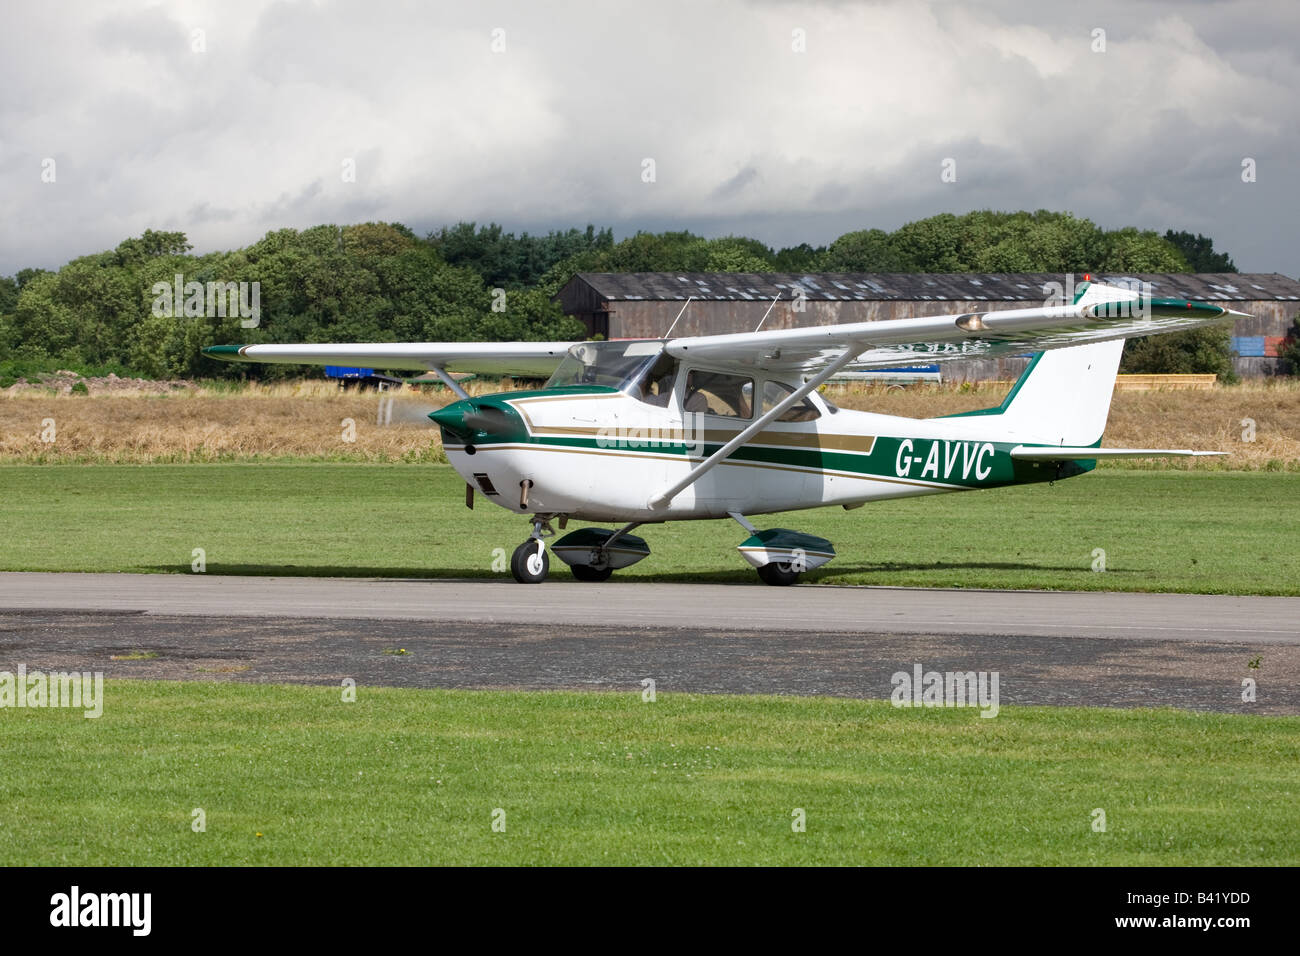 Reims Cessna F172H Skyhawk G-AVVC taxiing after landing at Breighton Airfield Stock Photo